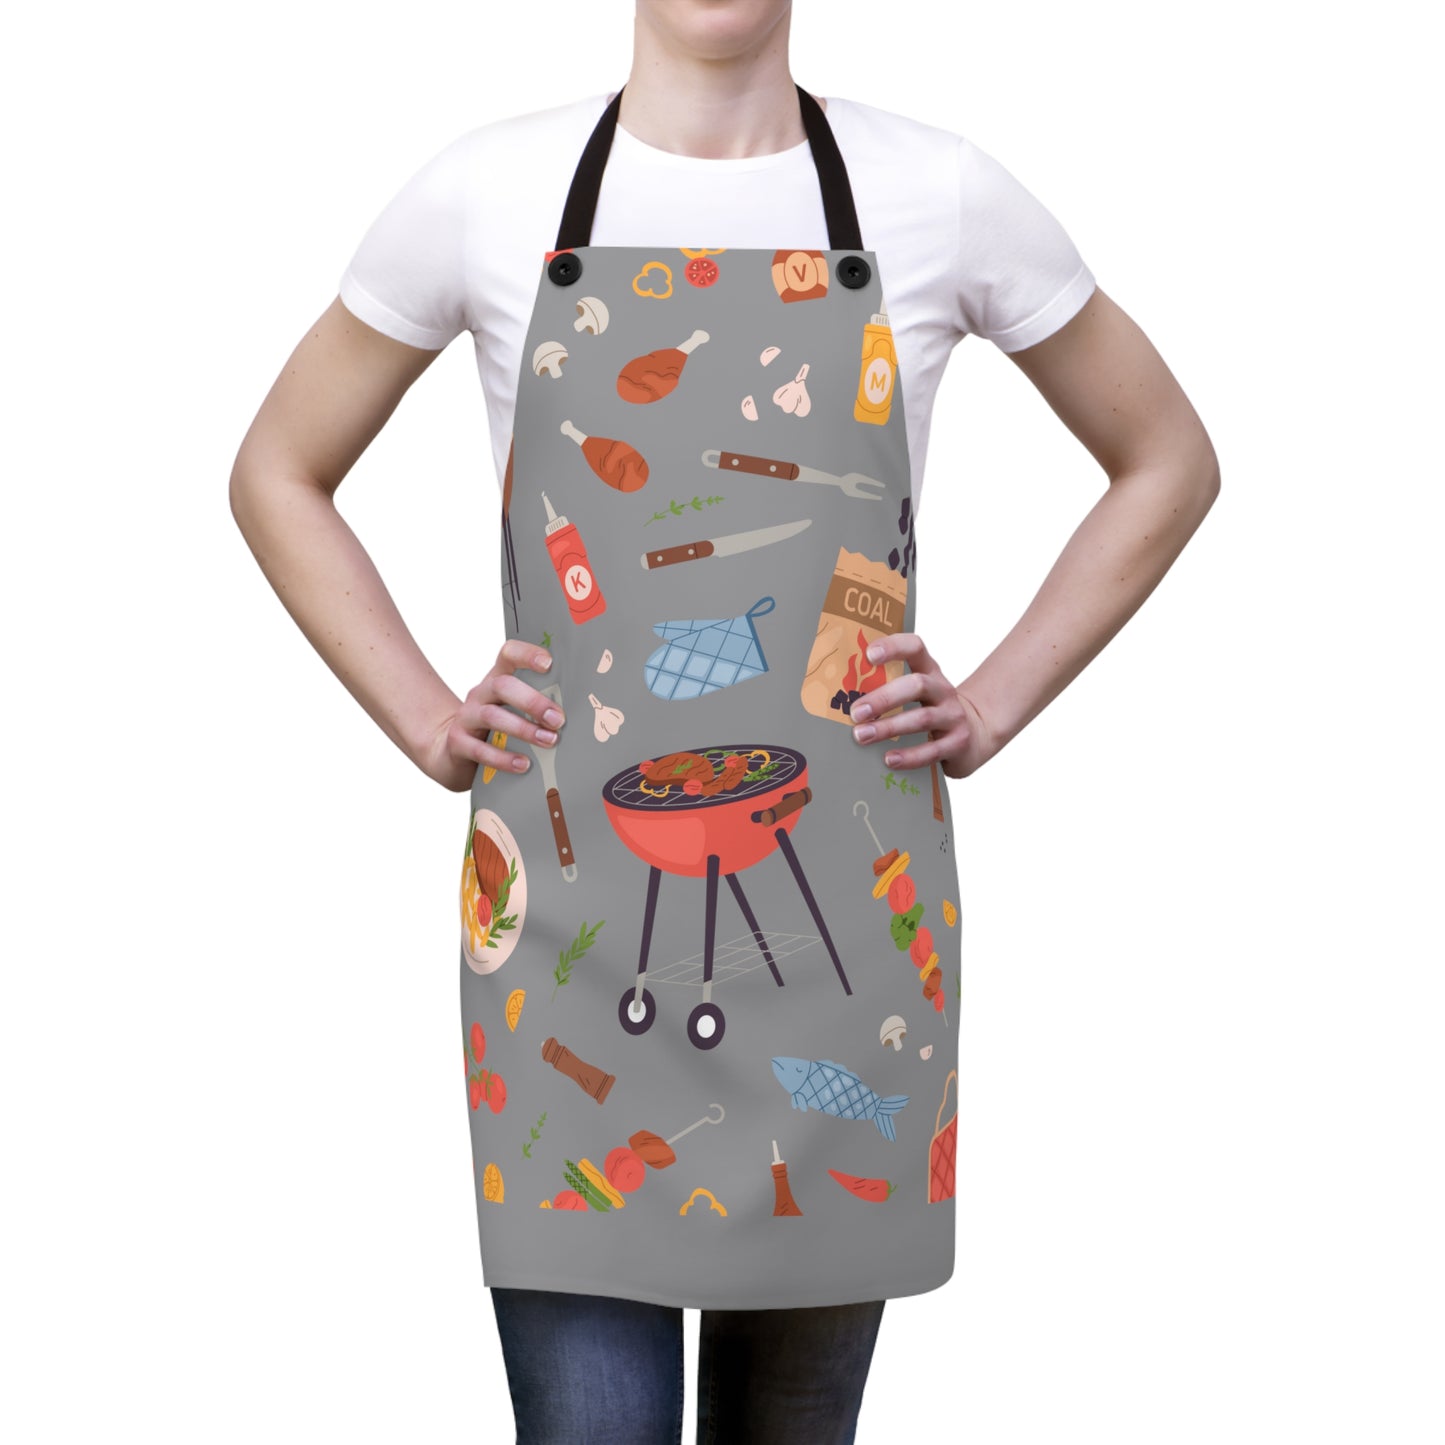 Mock up of a woman wearing the apron